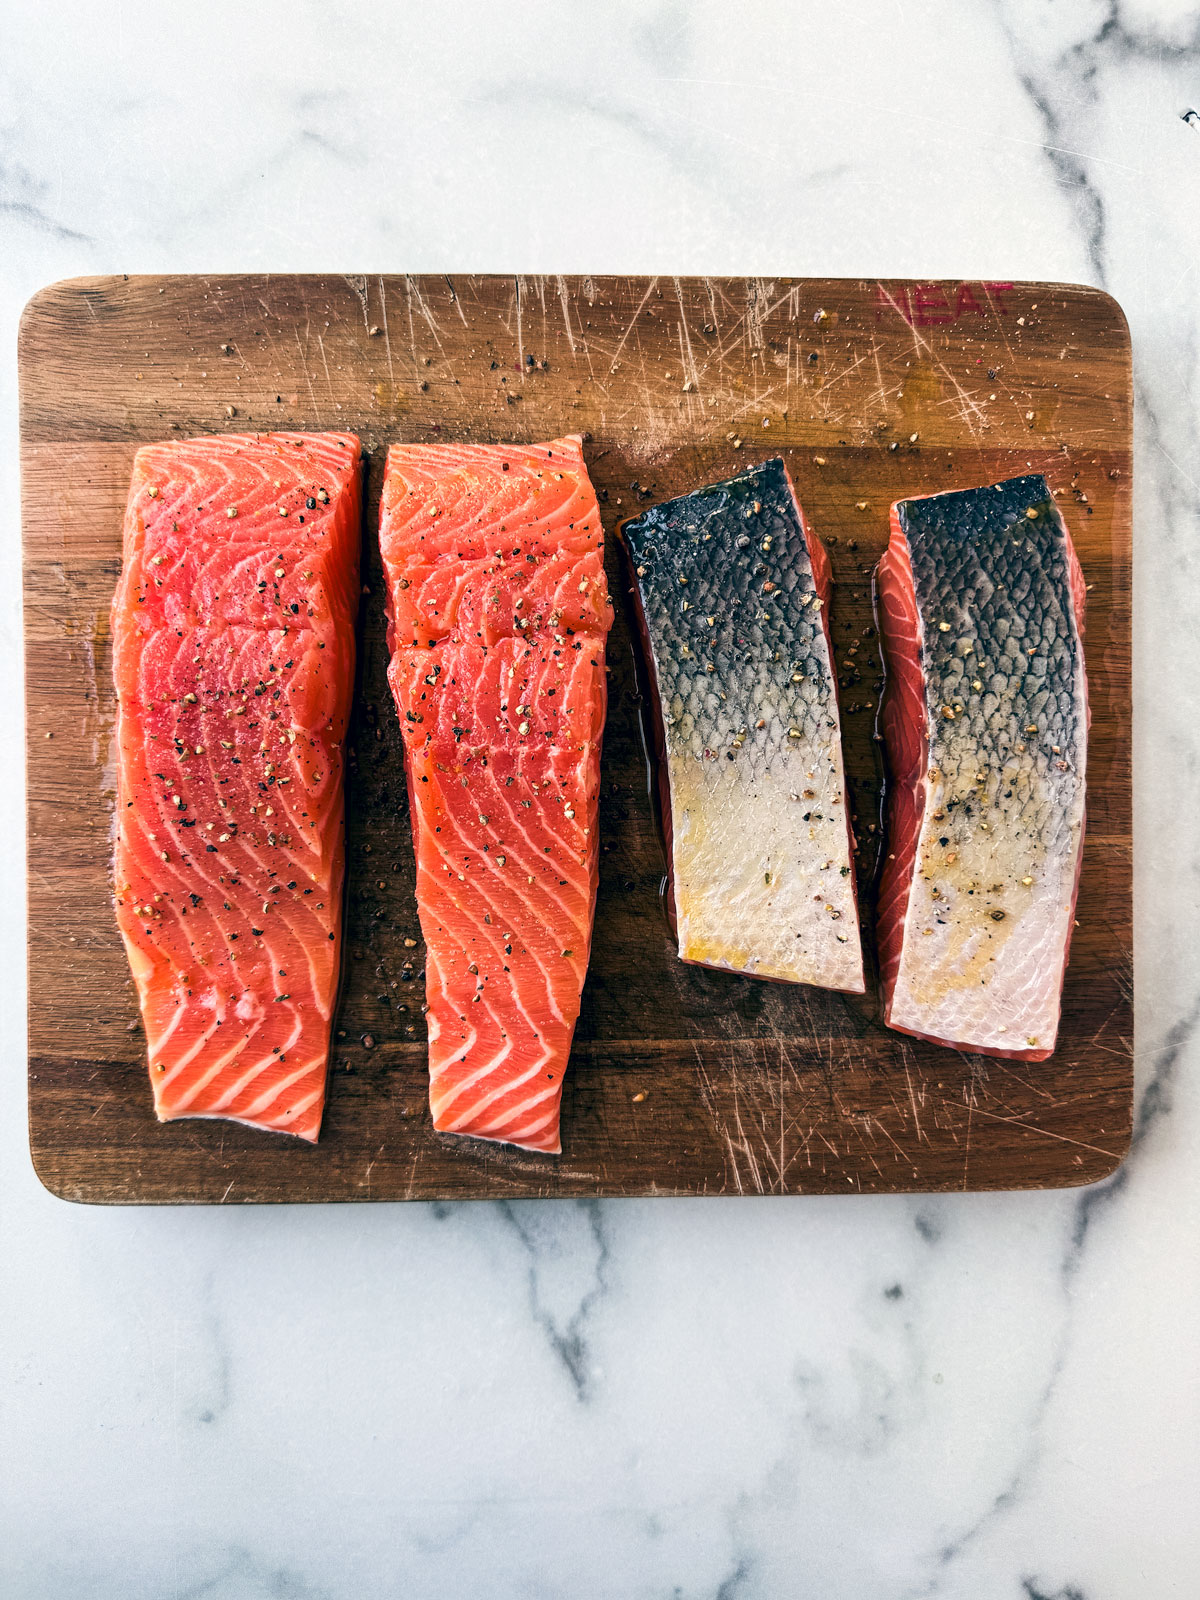 Fillets of salmon seasoned and oiled on a wooden cutting board.